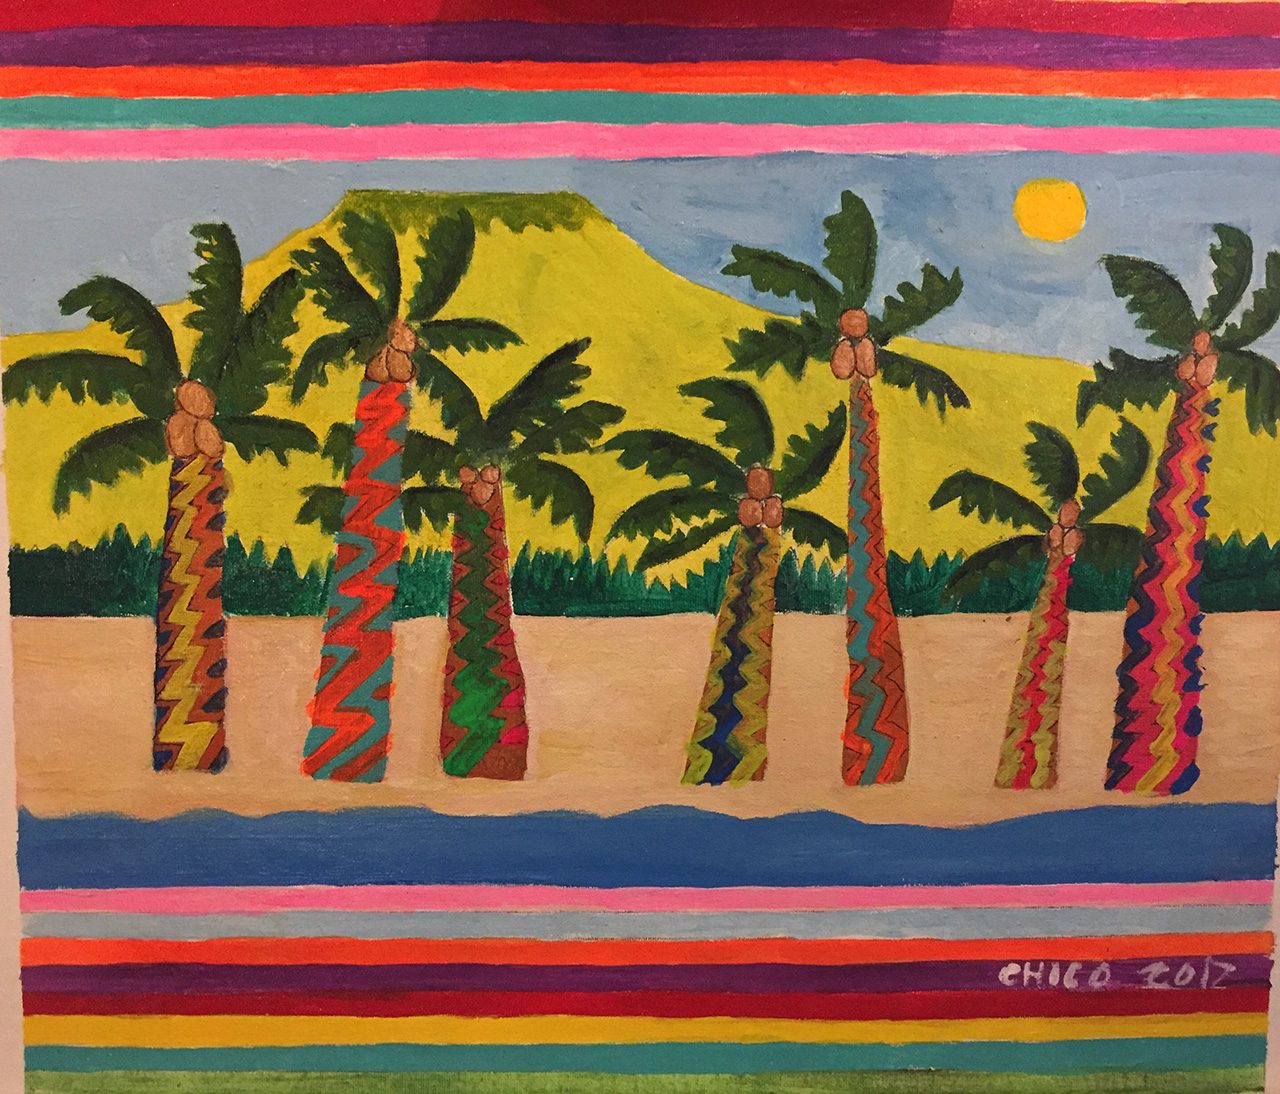 PHILIPPINES. Inspired by his travels around the country, Chico Joaquin's Wow Philippines depicts a simple yet unifying image of the archipelago. Accordingly, the coconut tree's colorful truck shows the diverse culture of the people 